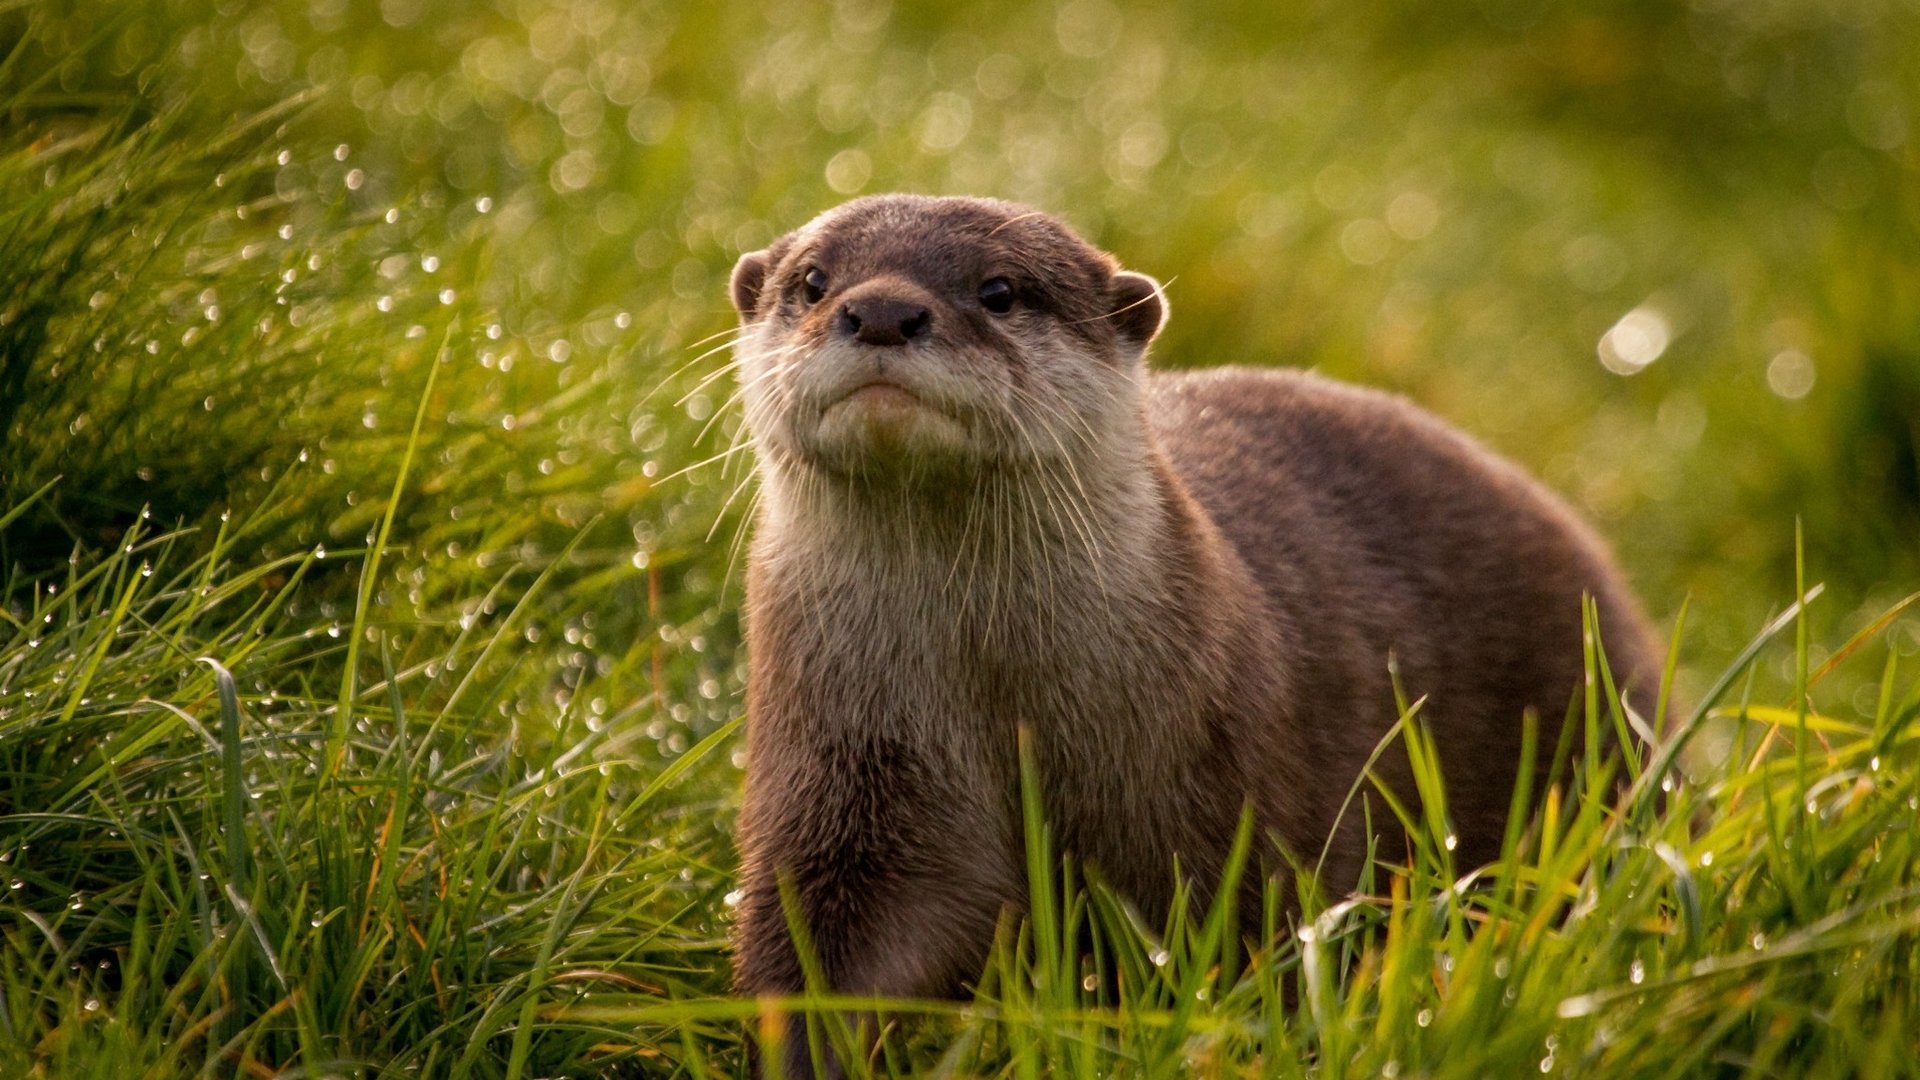 The giant river otter has returned to Argentina - Lonely Planet